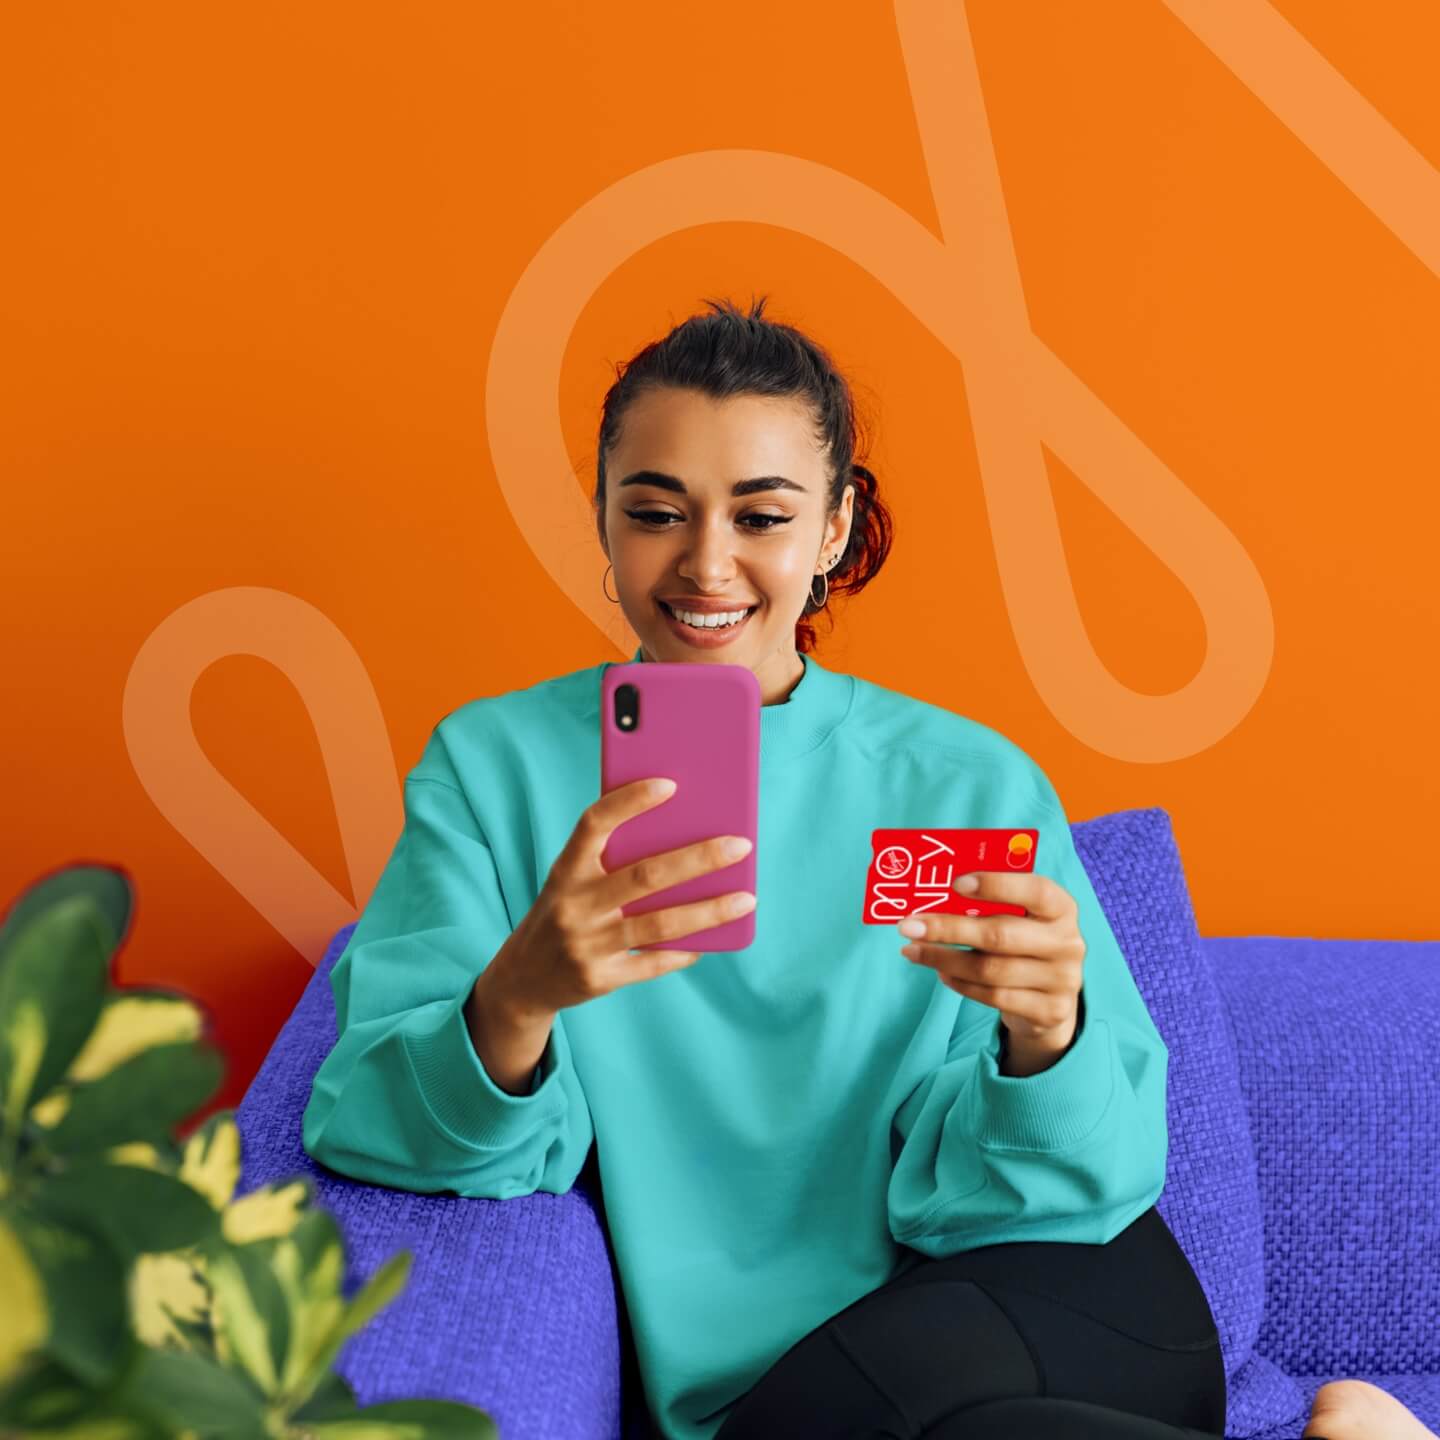 smiling woman holding a pink phone and virgin credit card